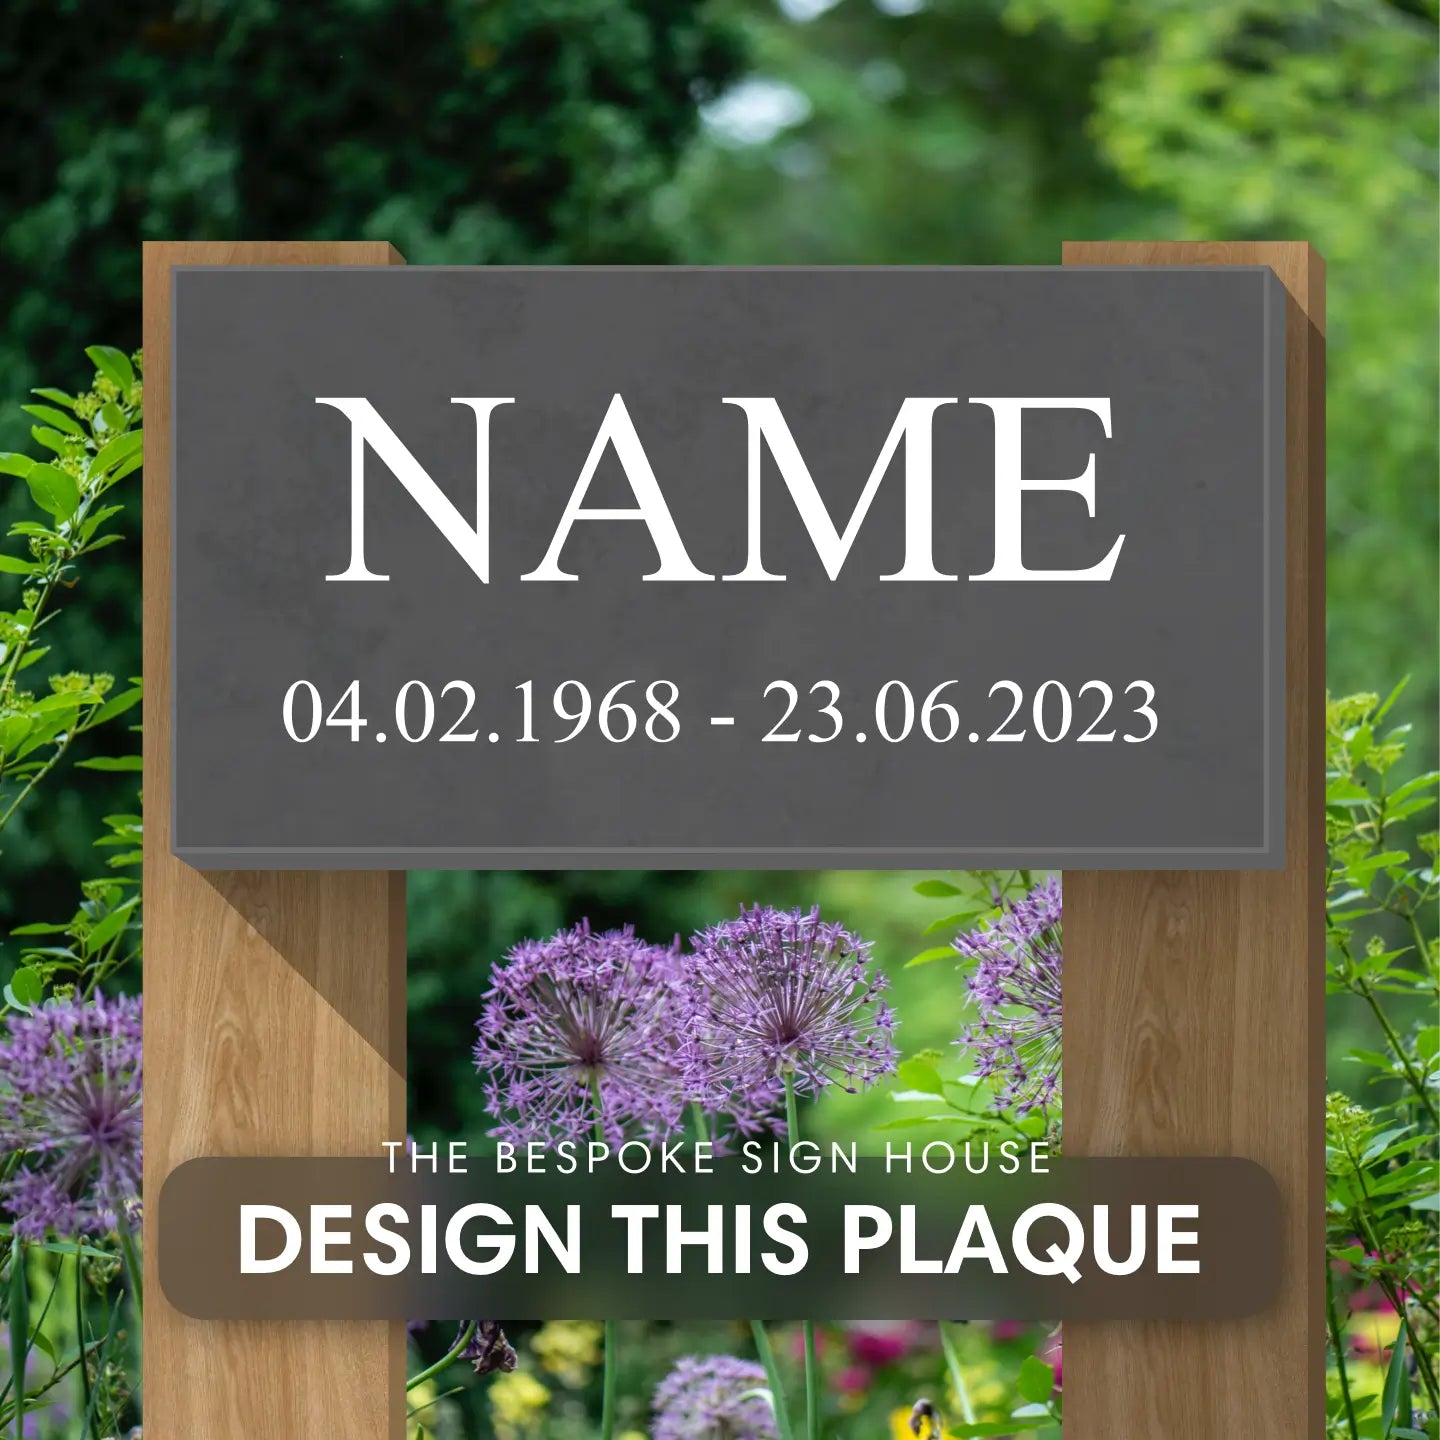 A memorial message grave plaque made out of slate and displayed in a garden on wooden posts.